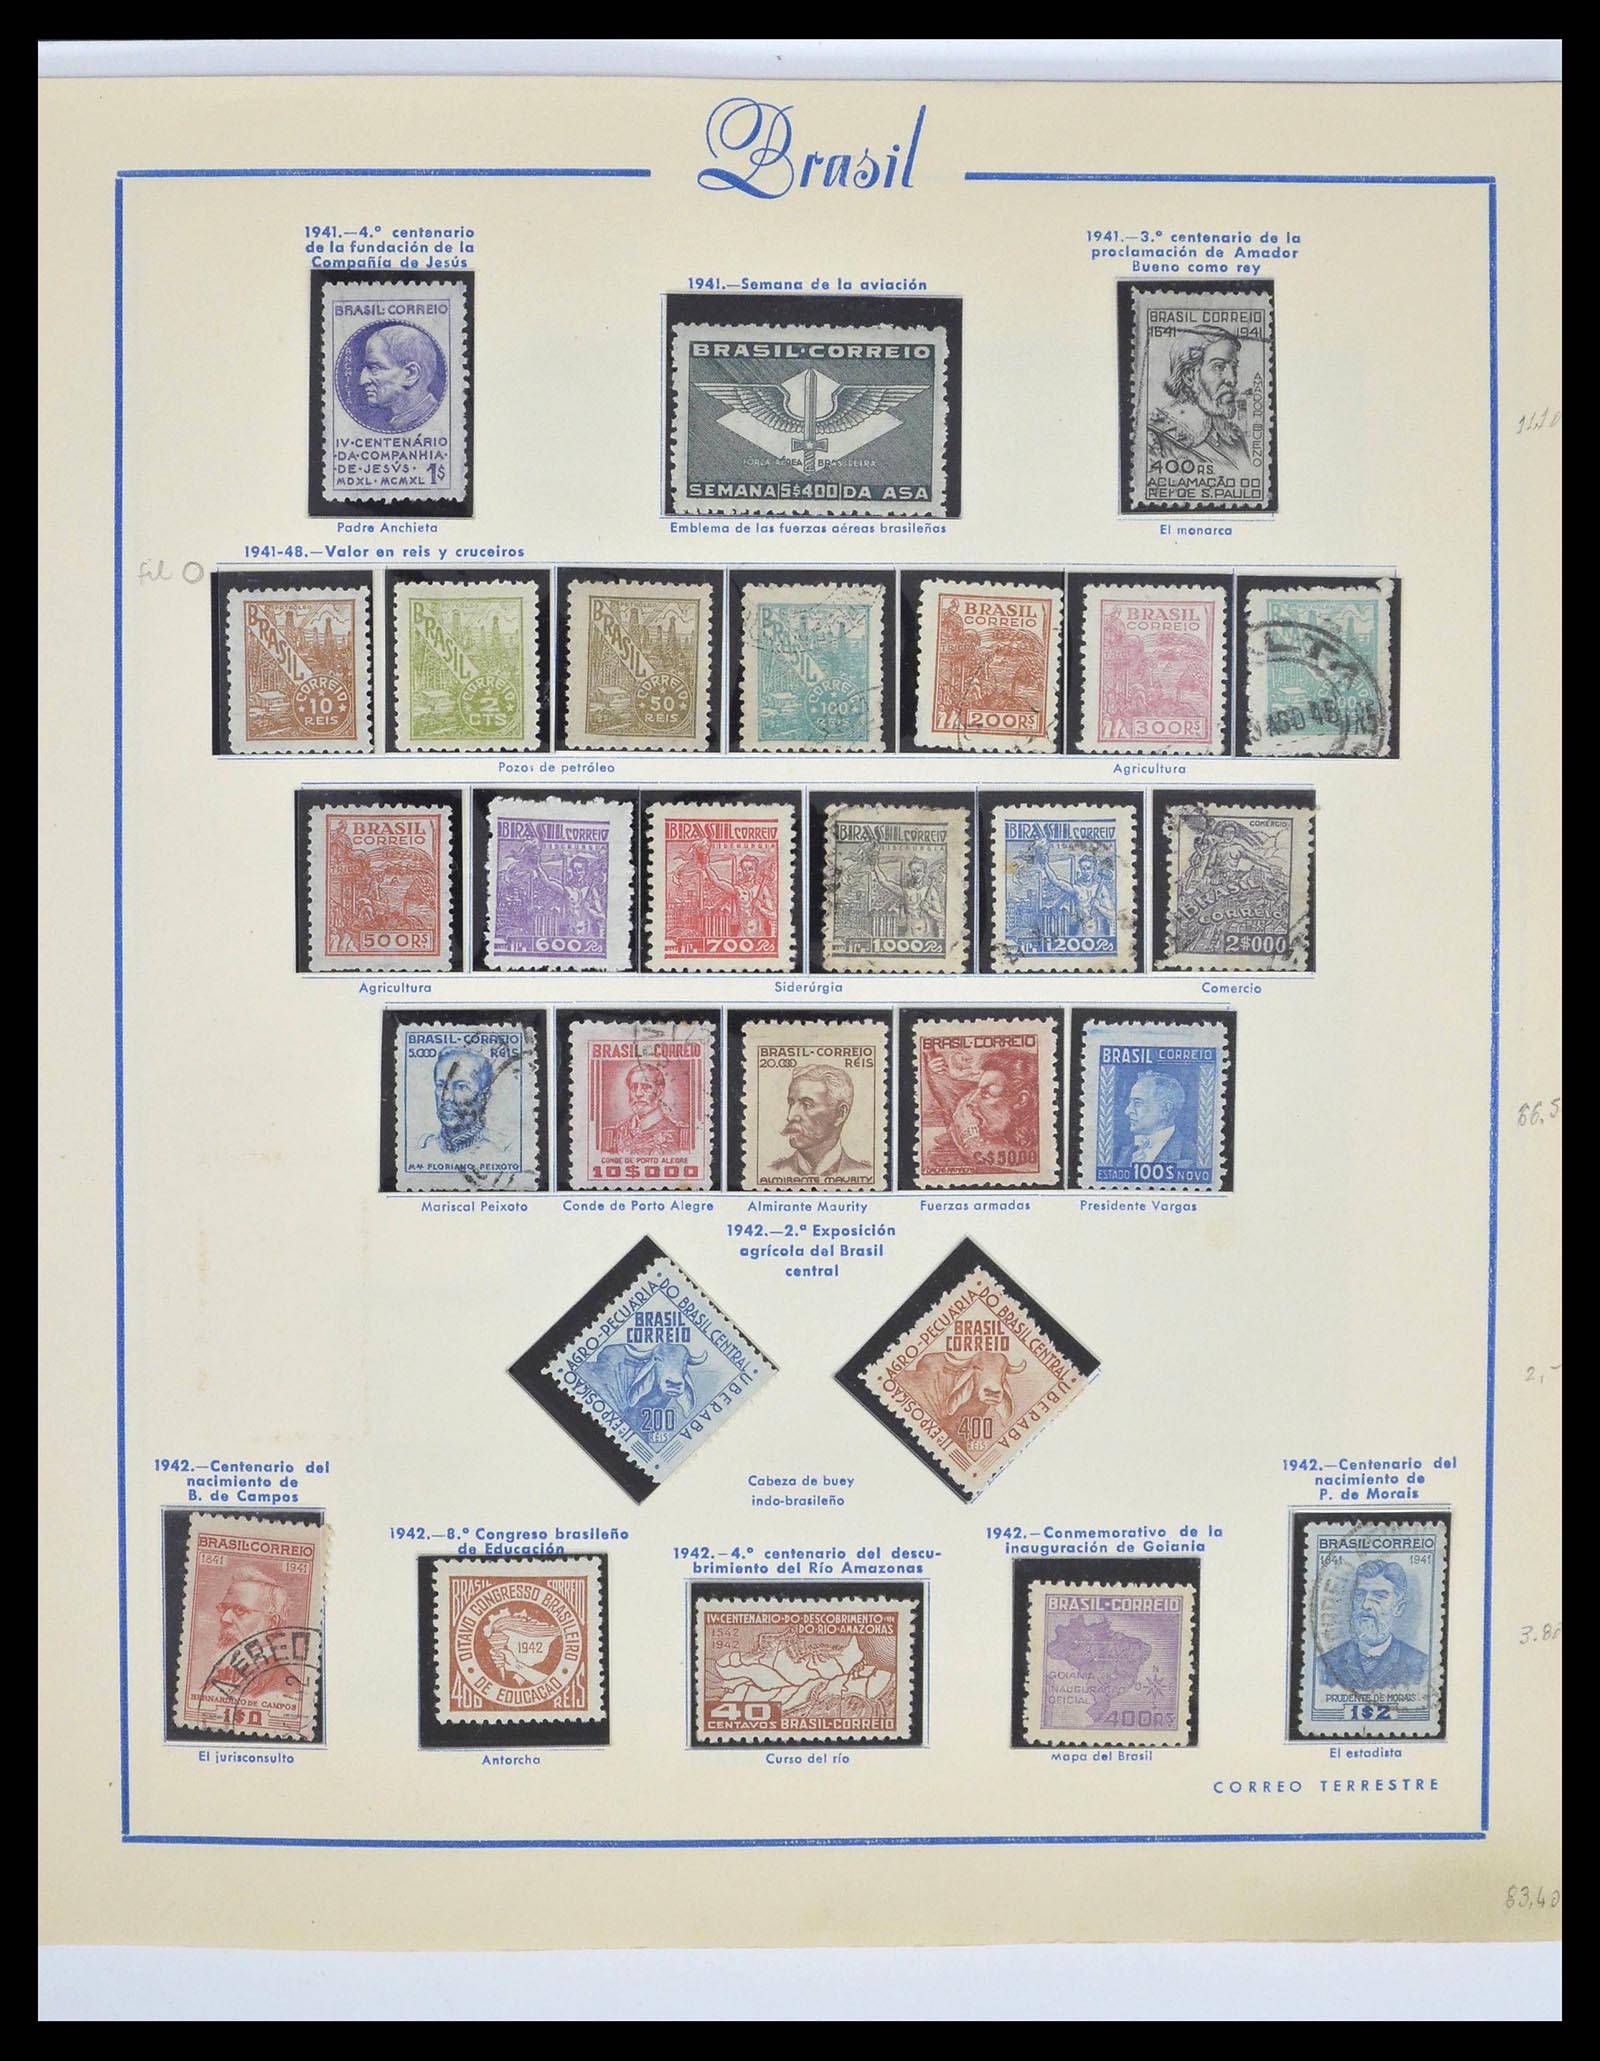 39245 0020 - Stamp collection 39245 Brazil 1843-1968.